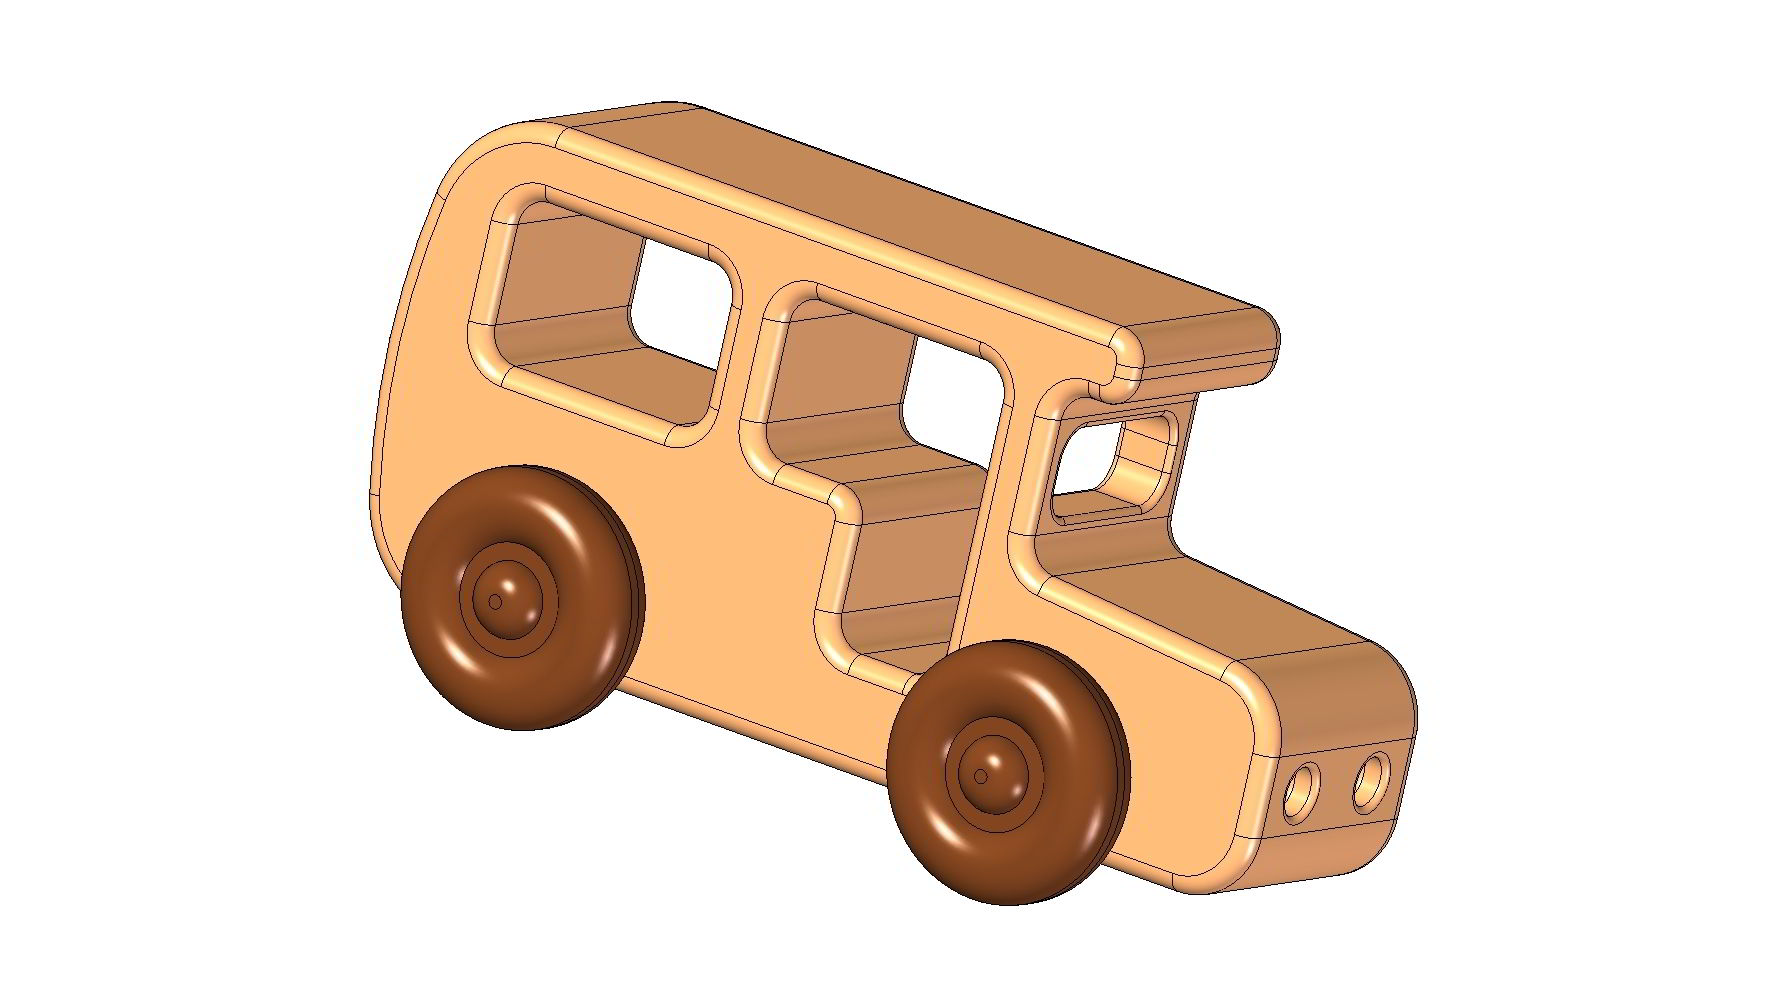 Wooden bus kids toy plan - 2,68Mb; 9 Pages